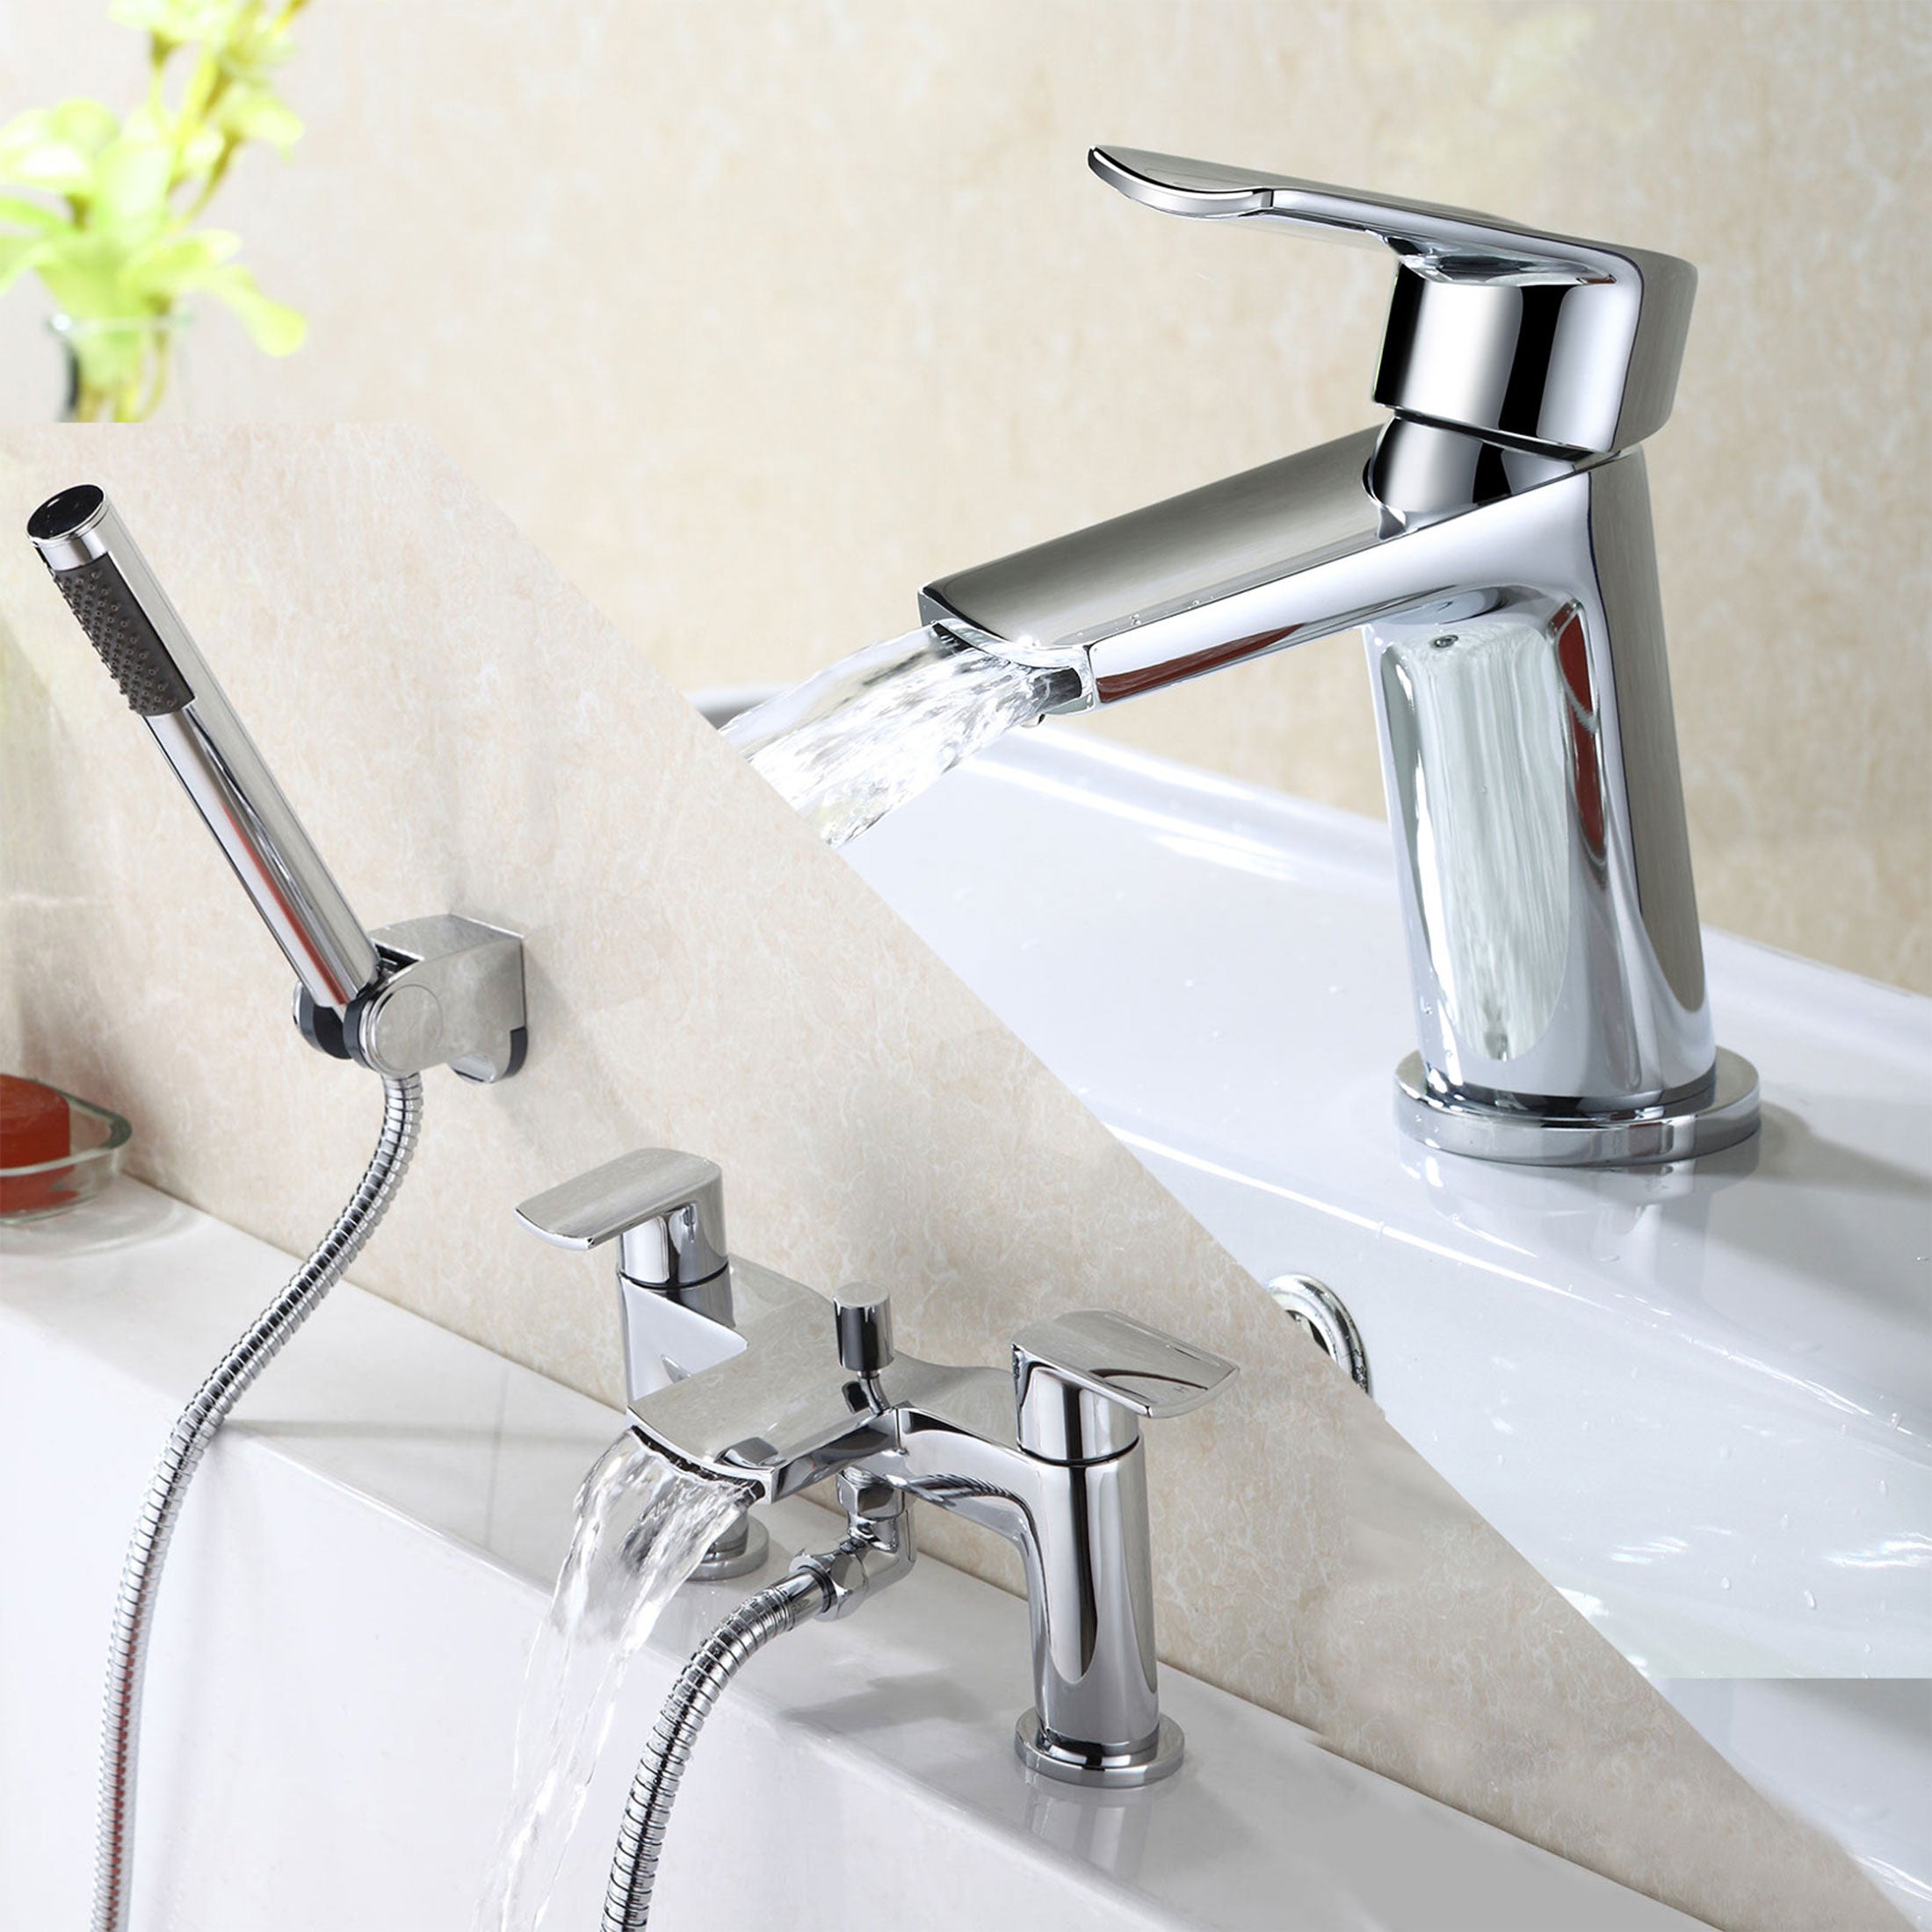 Centa Contemporary Chrome Basin Sink Mixer Tap And Bath Shower Mixer Tap With Pencil Handset Kit